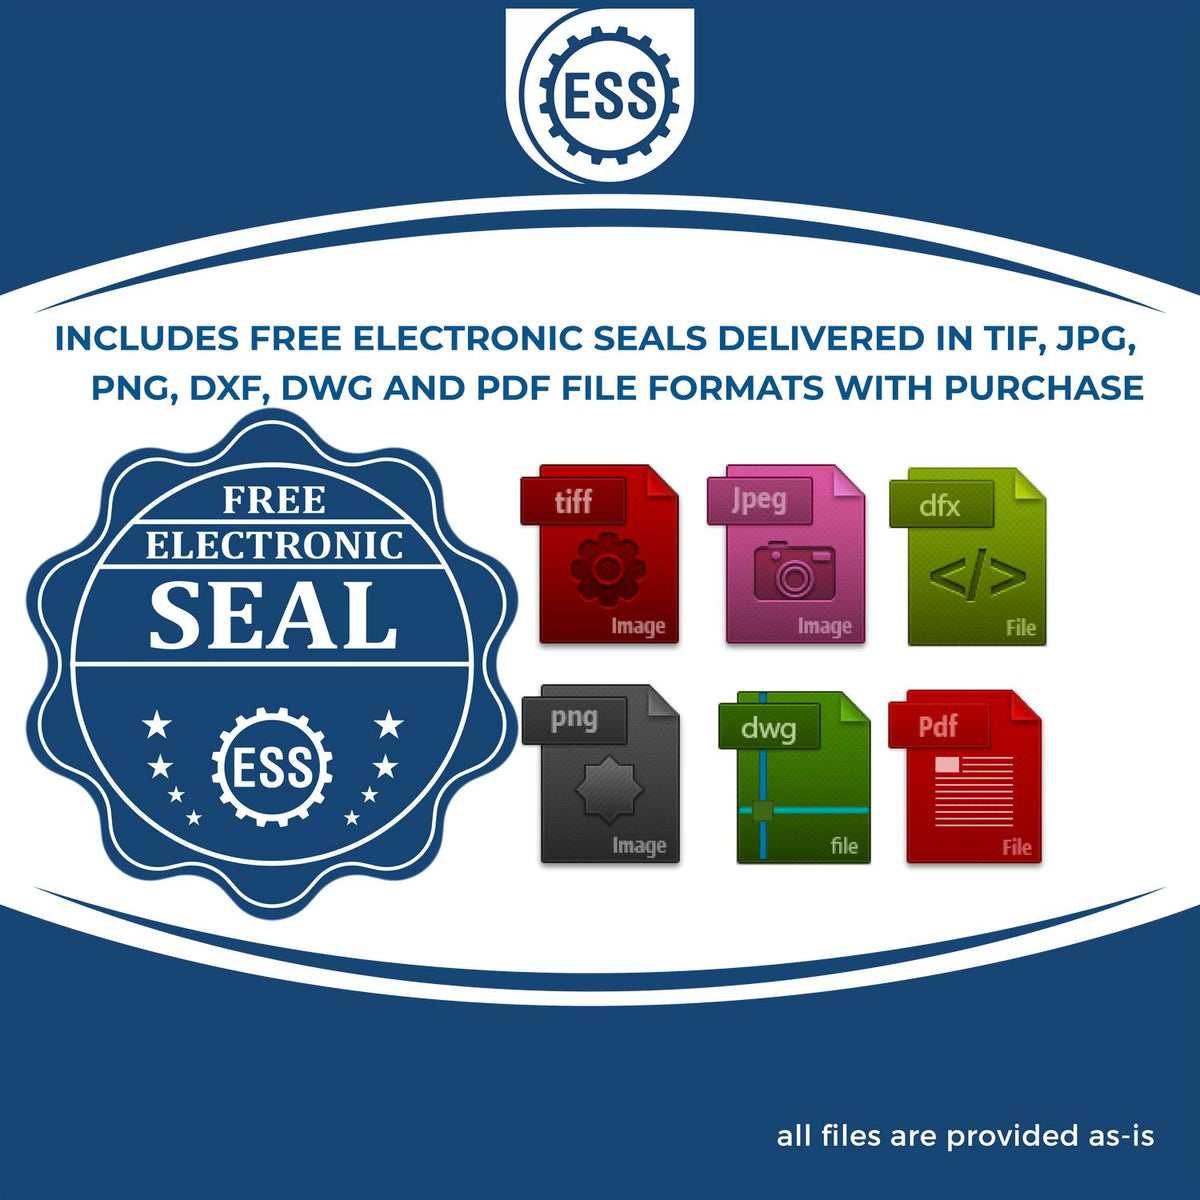 An infographic for the free electronic seal for the Self-Inking Georgia Landscape Architect Stamp illustrating the different file type icons such as DXF, DWG, TIF, JPG and PNG.